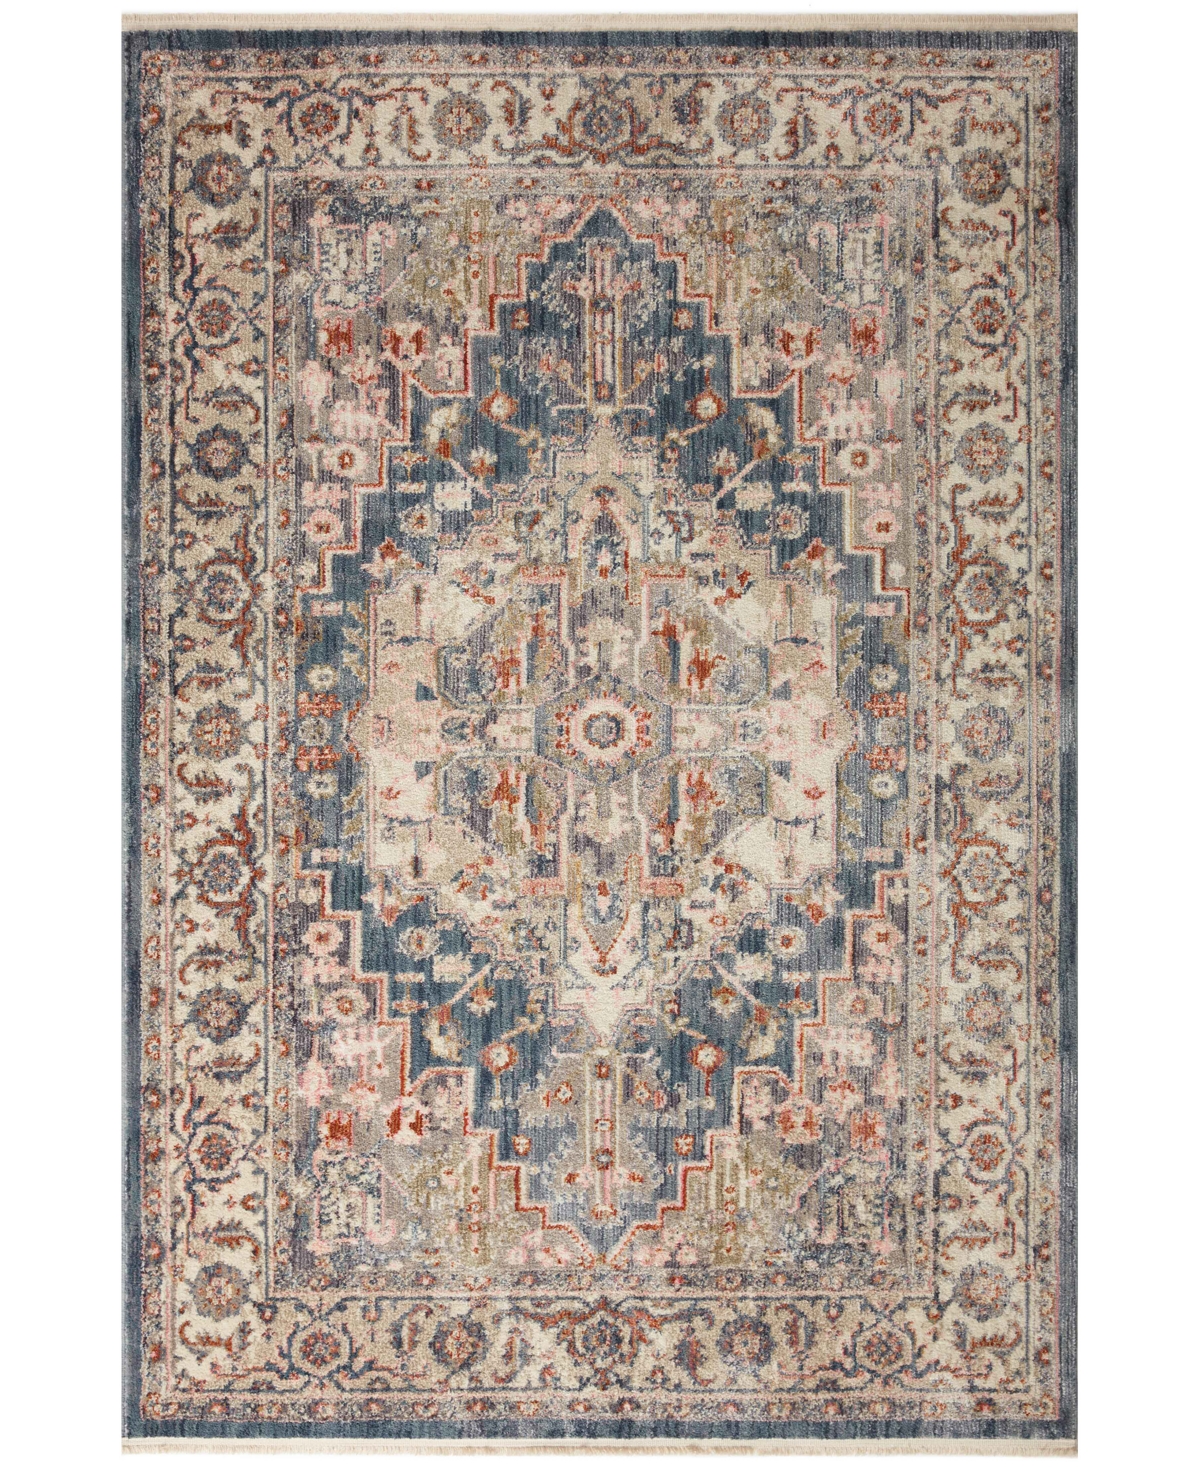 Magnolia Home By Joanna Gaines X Loloi Janey Jay-03 2'7" X 4' Area Rug In Indigo